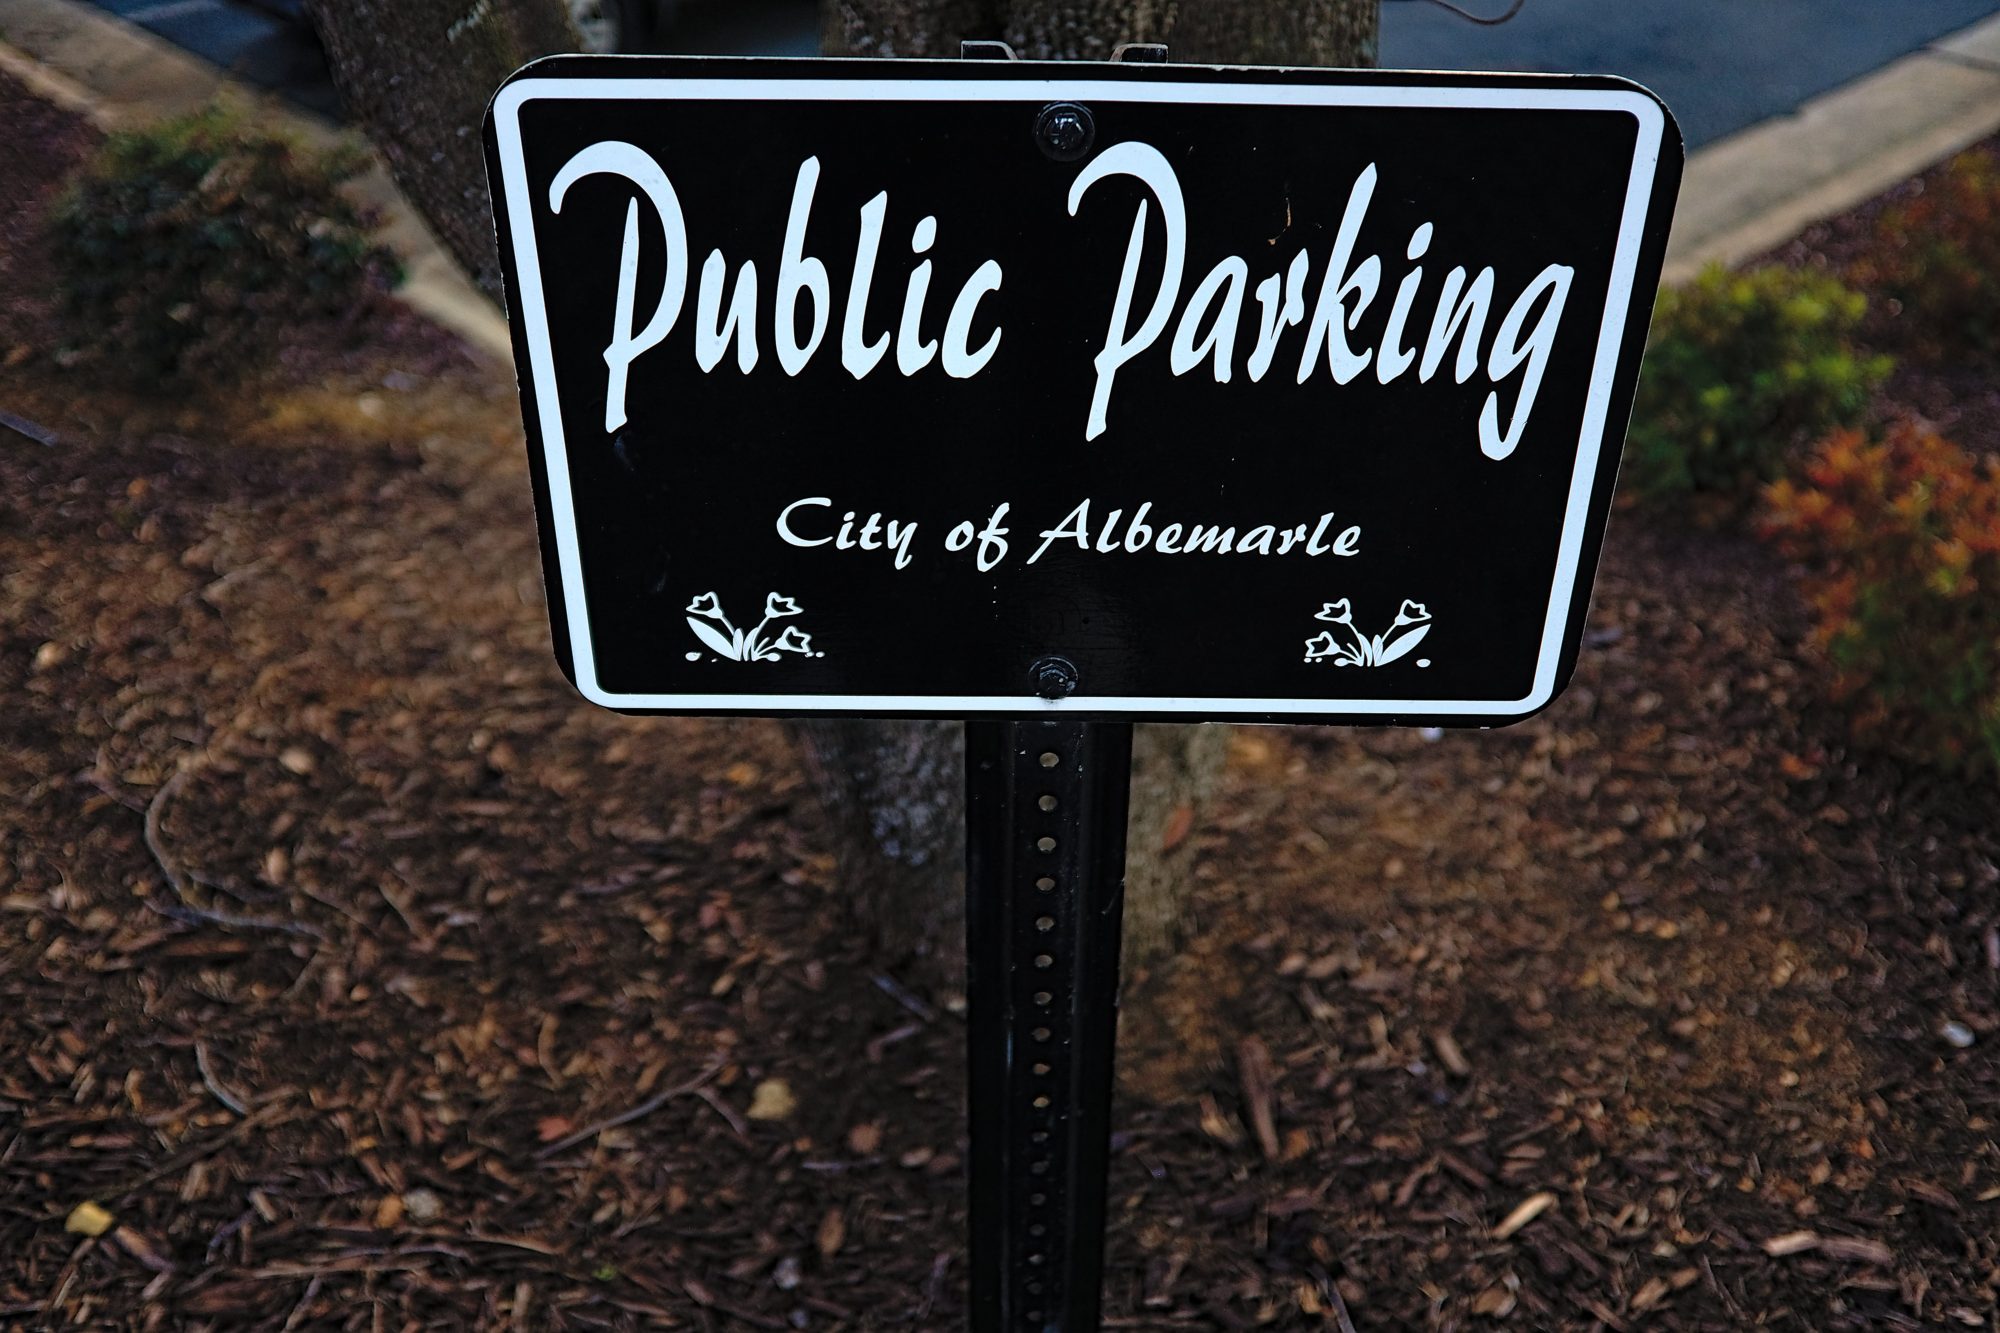 A sign that reads "Public Parking | City of Albemarle"